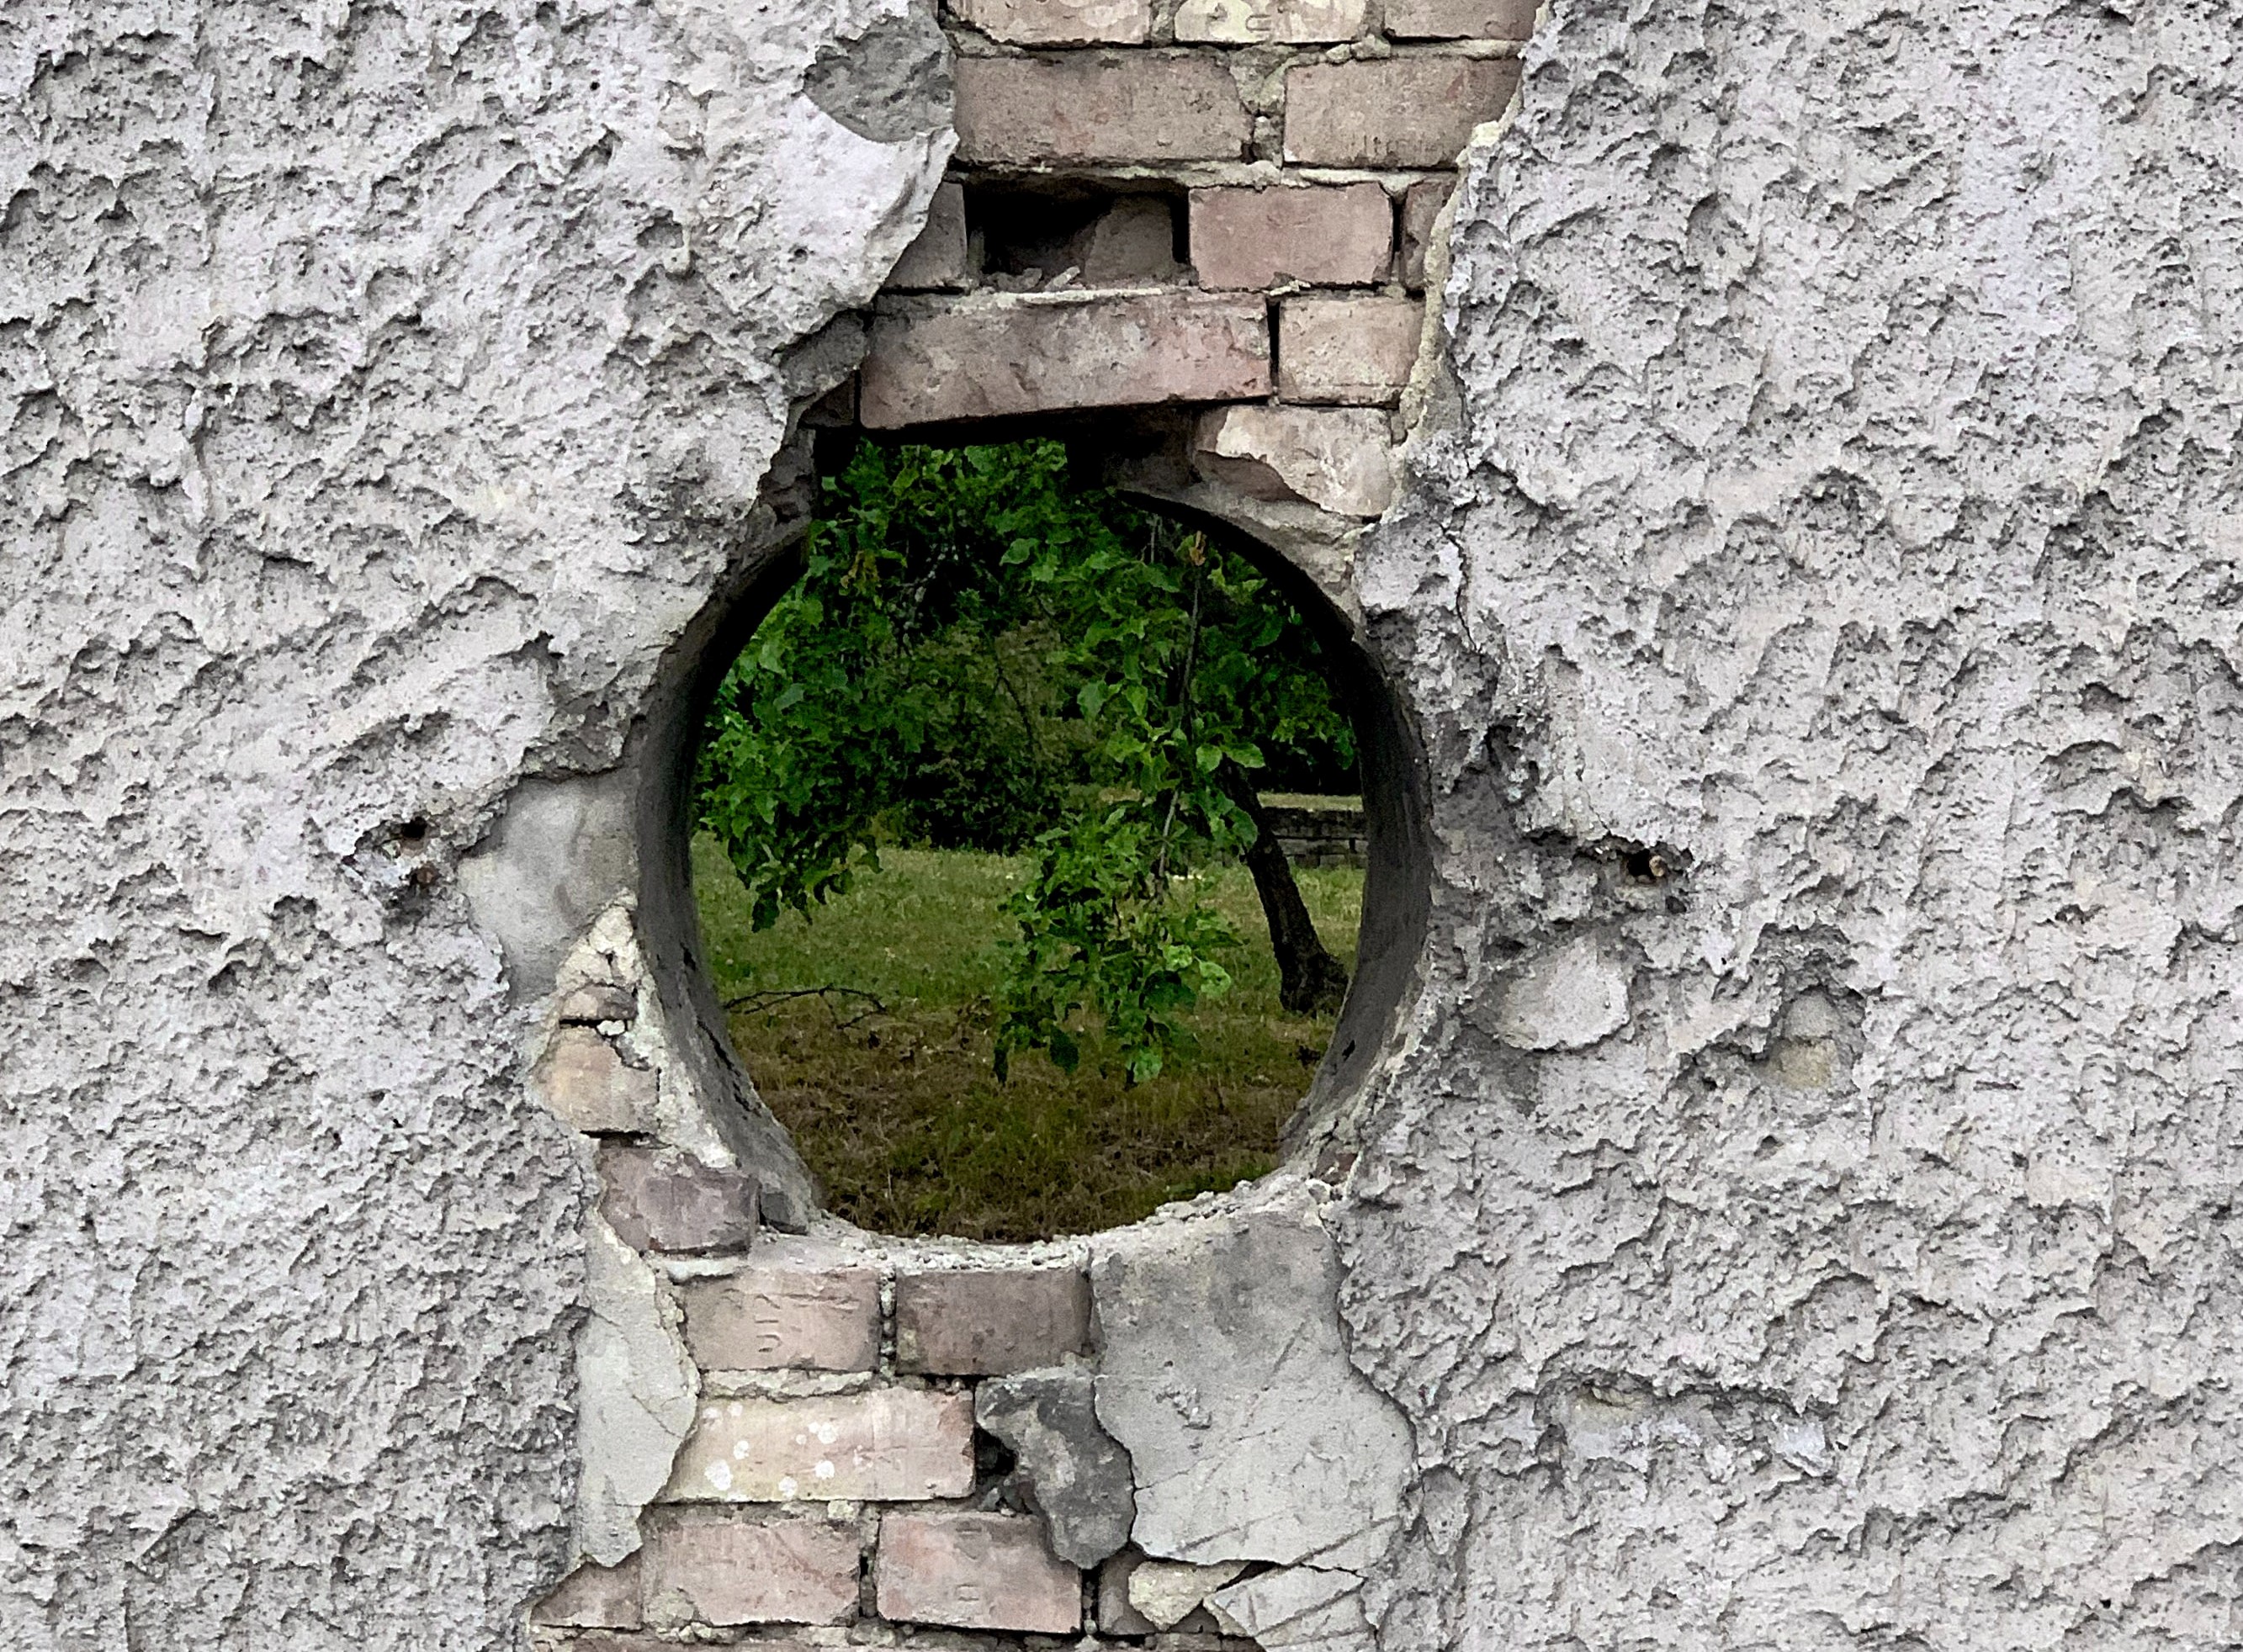 An aging, whitewashed brick and stucco wall has a hole, through which a natural green area can be seen.